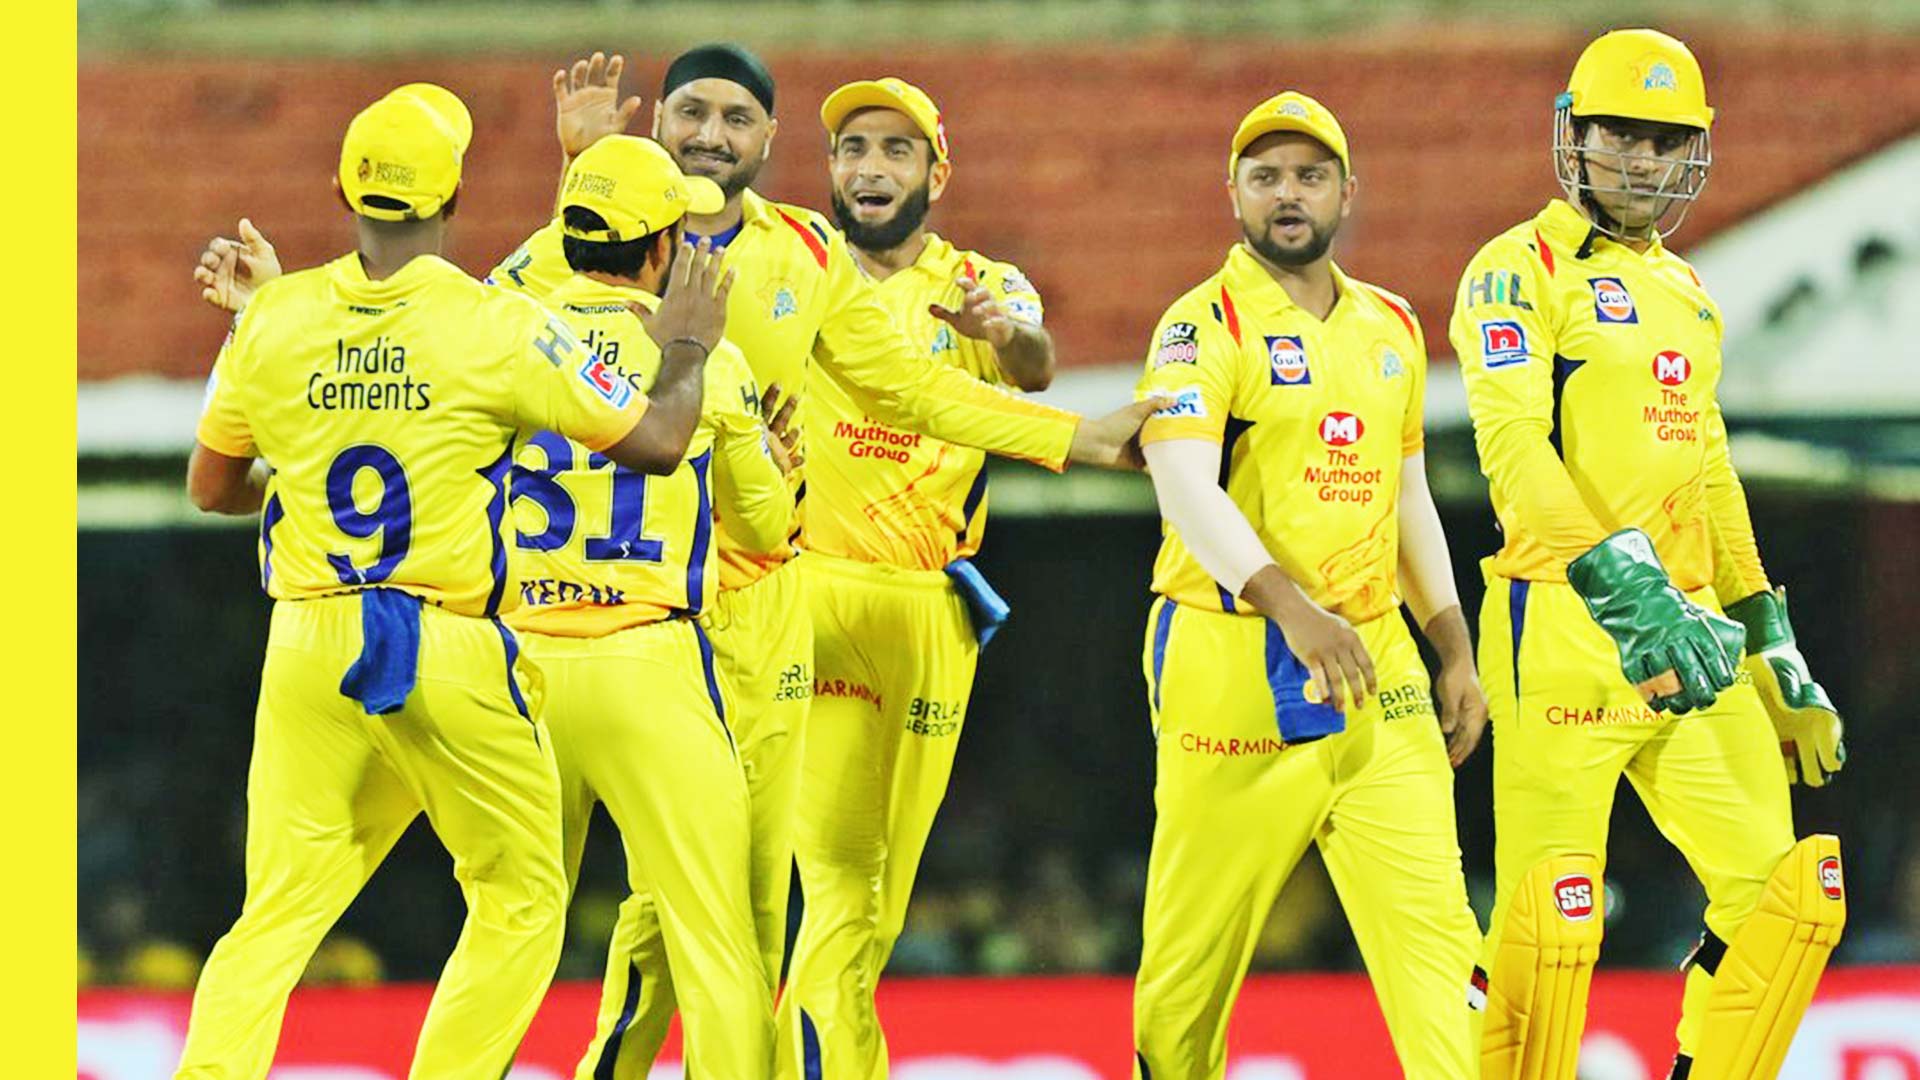 IPL 2019 Qualifier 1 MI vs CSK playing 11 today, match preview